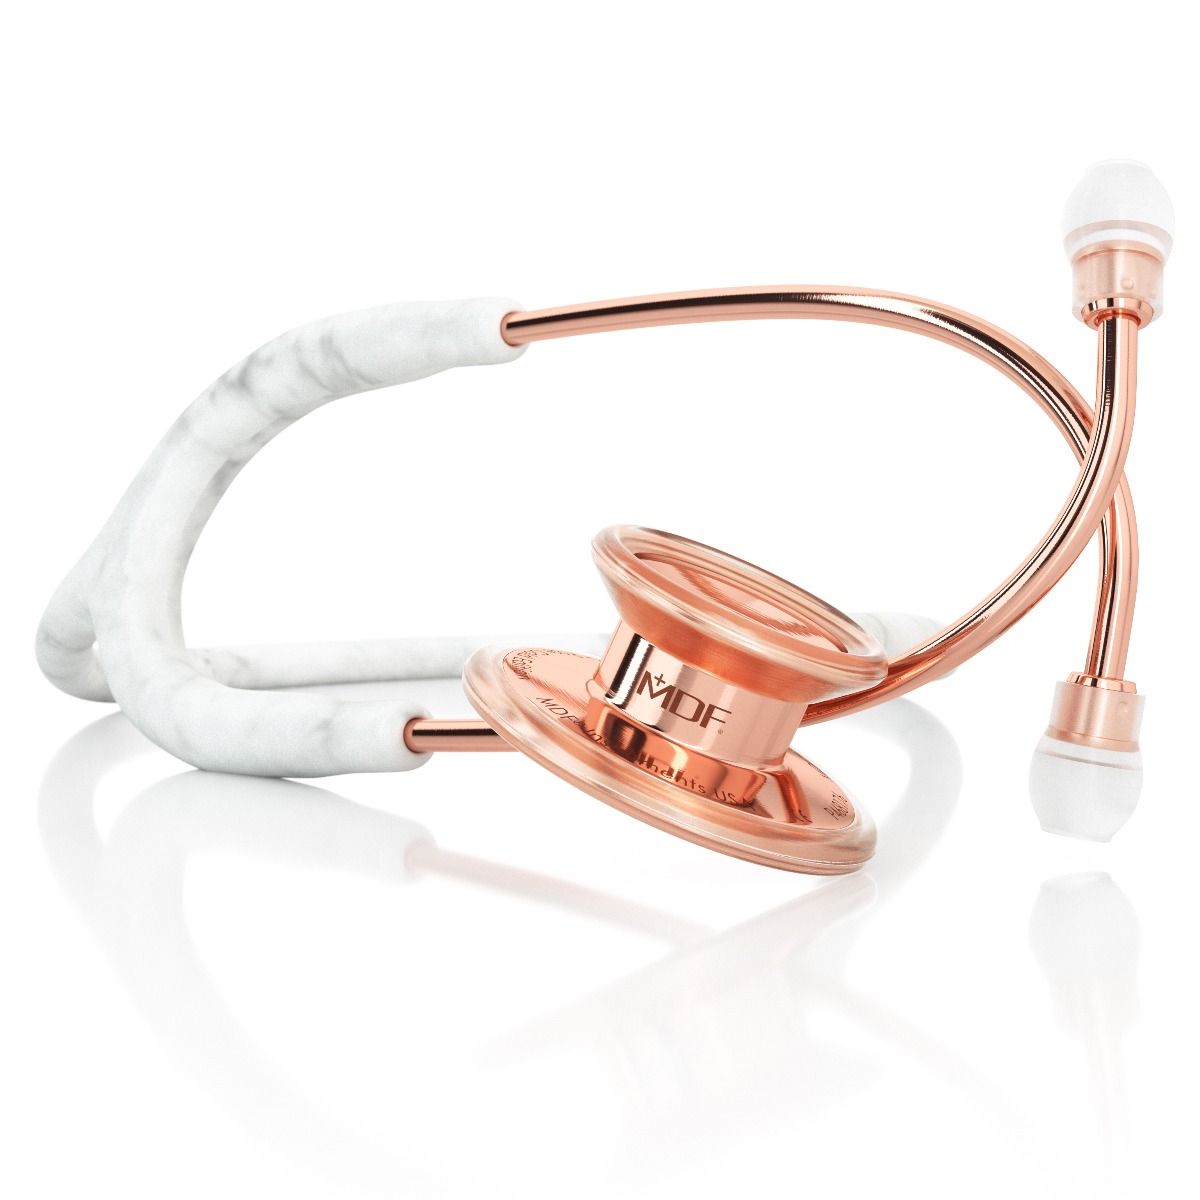 MD One® Stethoscope - Adult - Marble Rose Gold